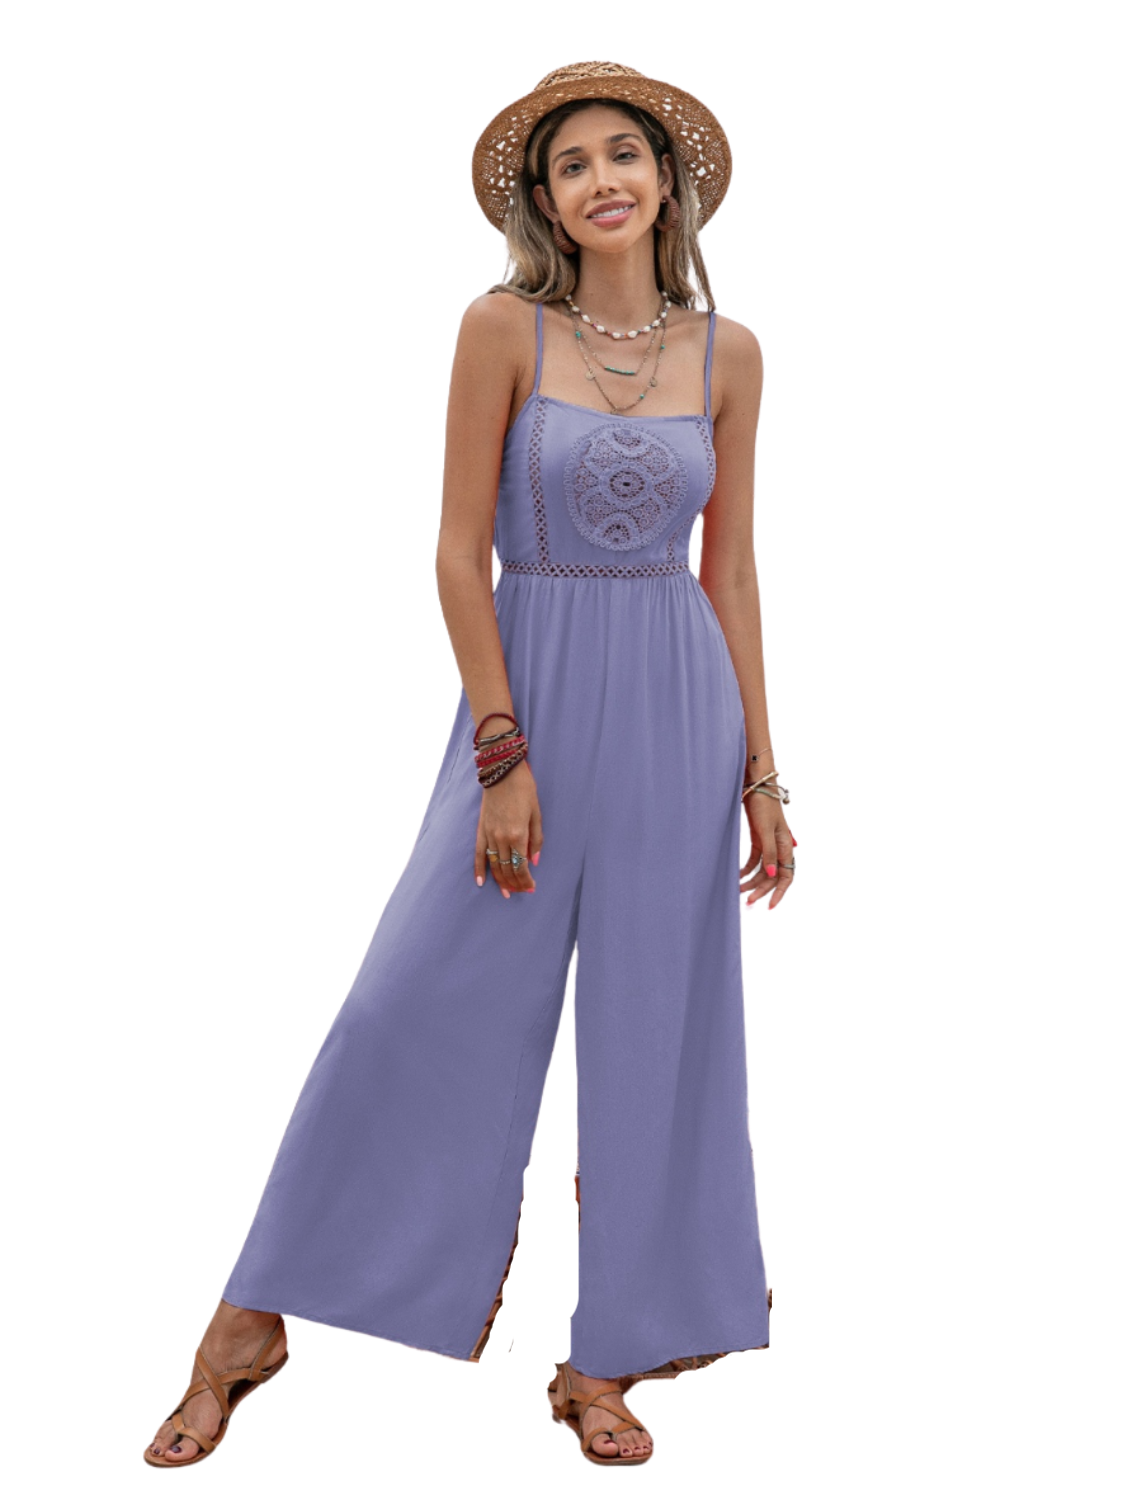 Elevate your summer style effortlessly with our Openwork Spaghetti Strap Wide Leg Jumpsuit. Lightweight, versatile, and chic in lavender or coral